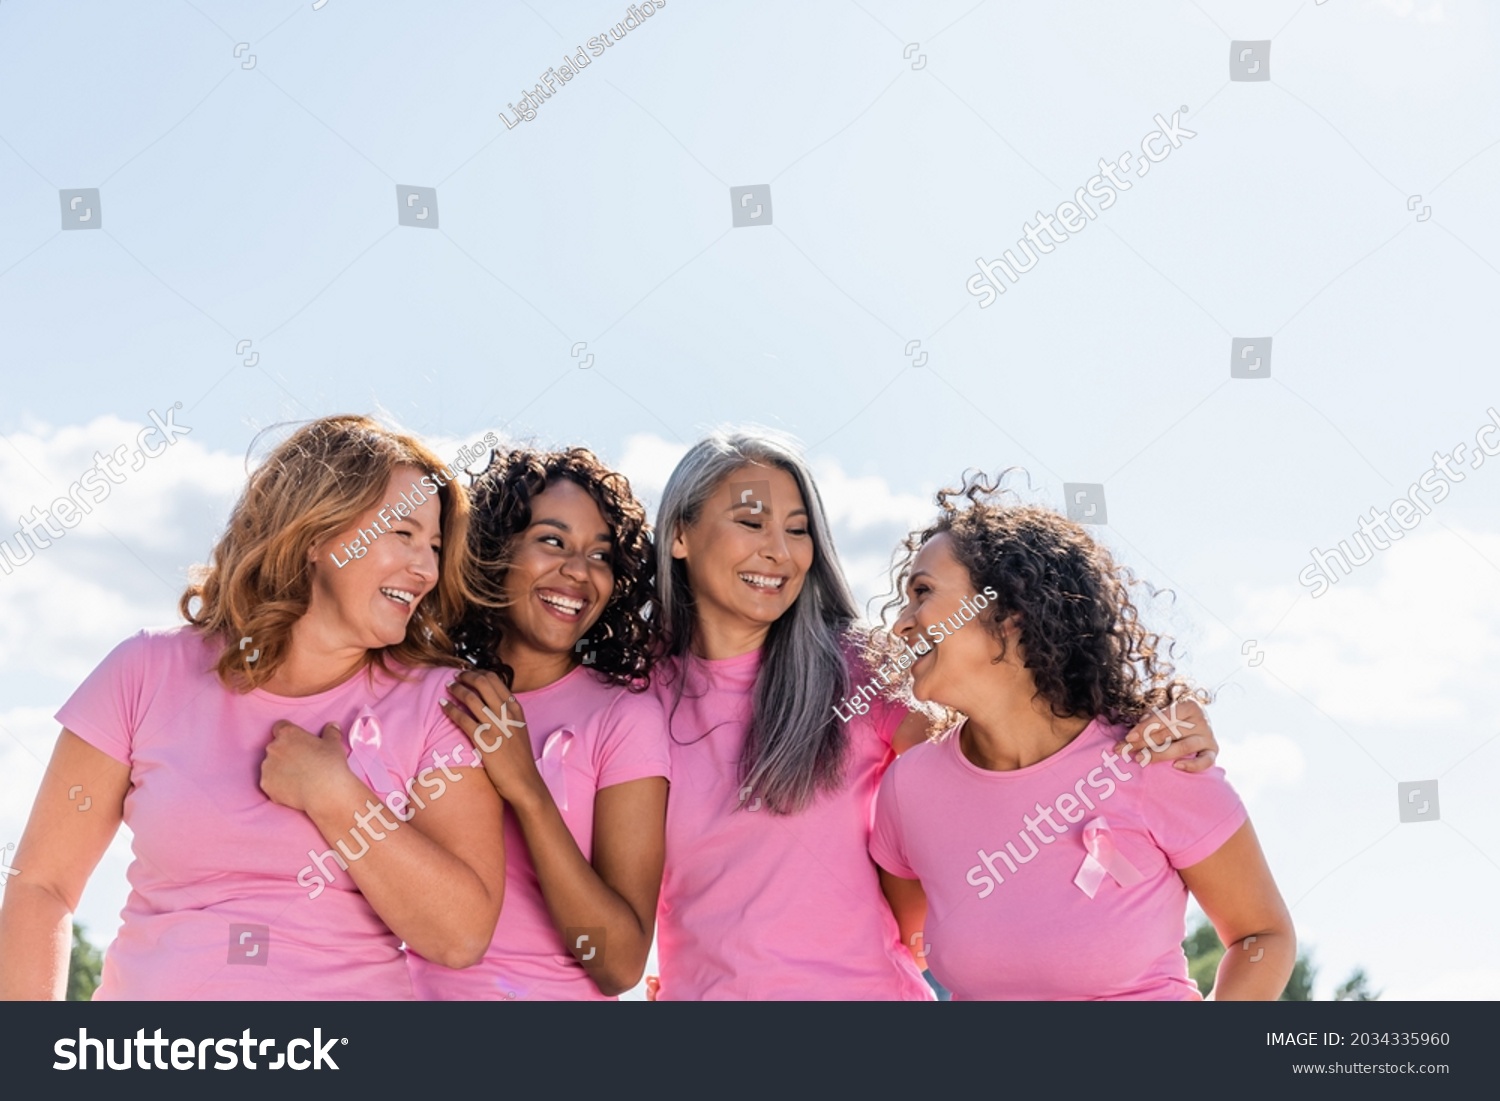 Cheerful multiethnic women with ribbons of breast cancer awareness hugging outdoors #2034335960